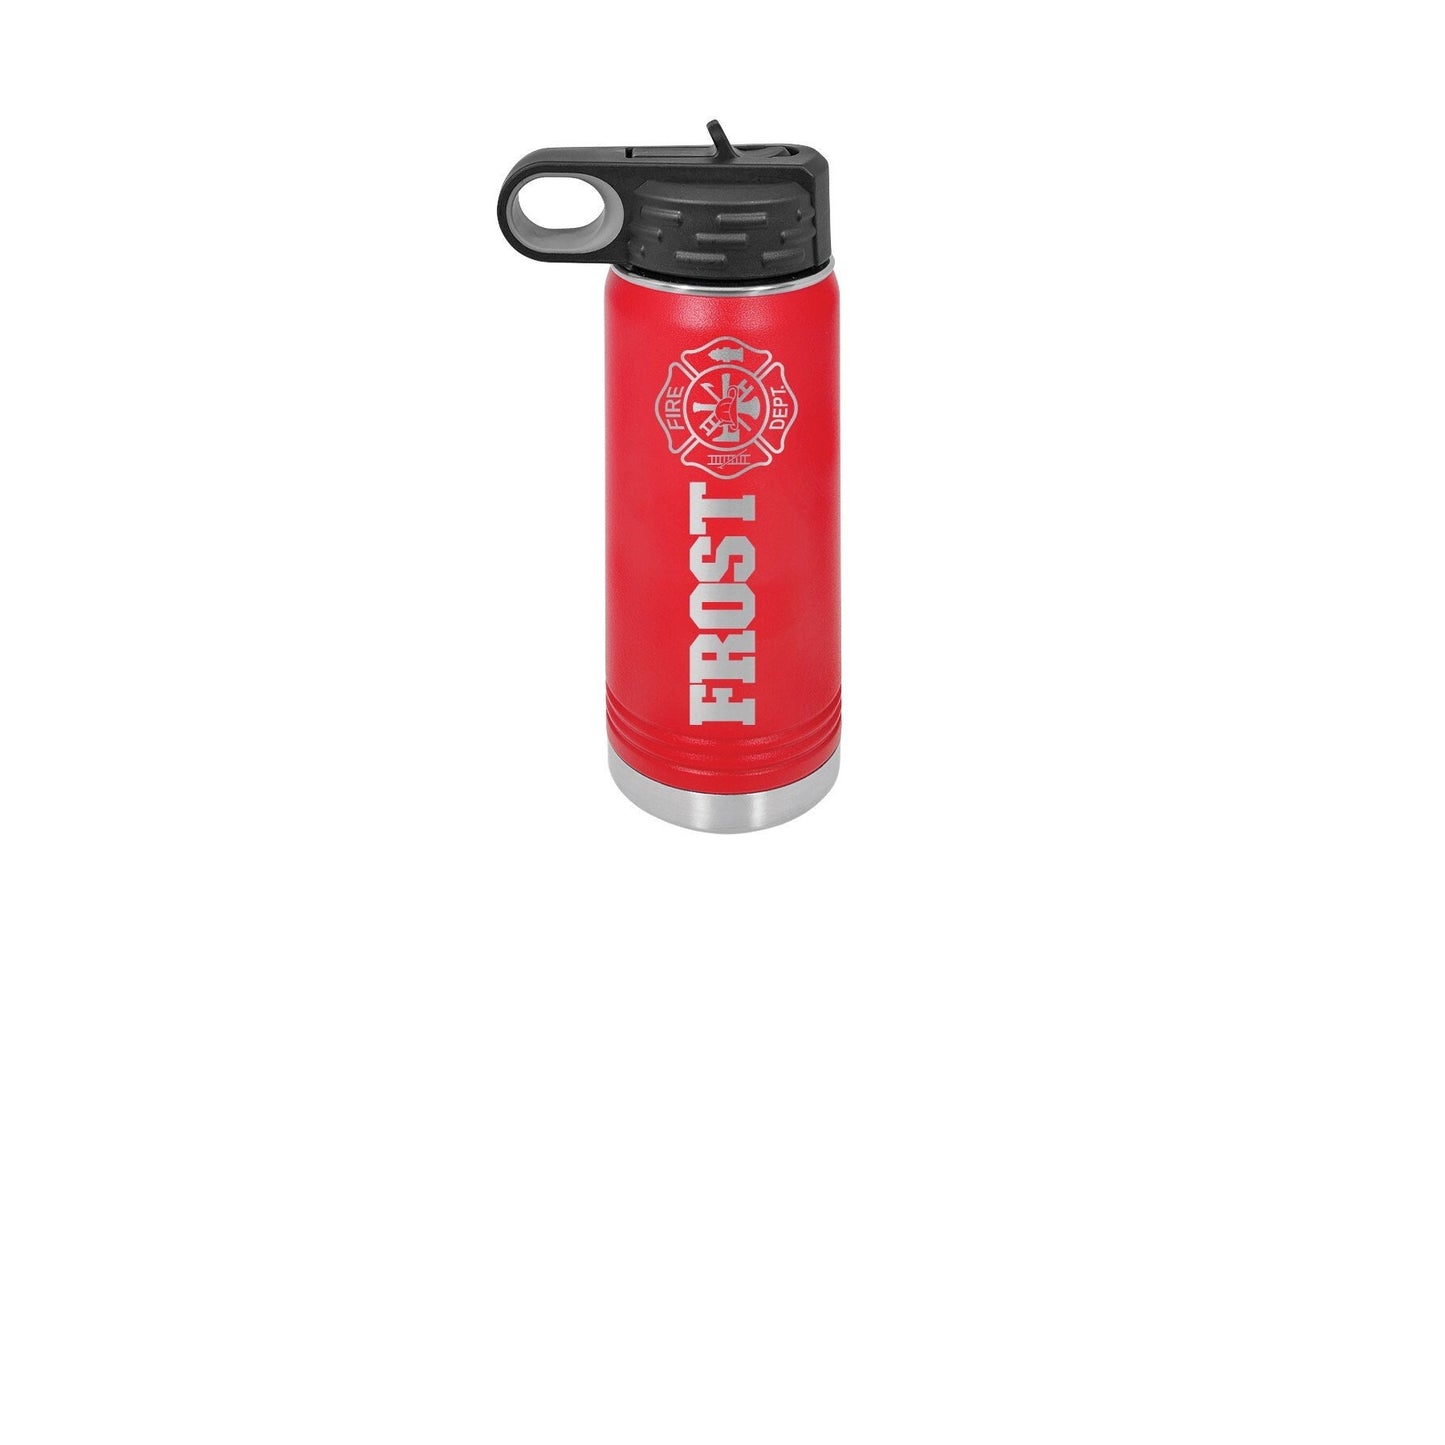 Personalized Gift Engraved Firefighter First Responder Water Bottle 32 oz. Custom Name 1096